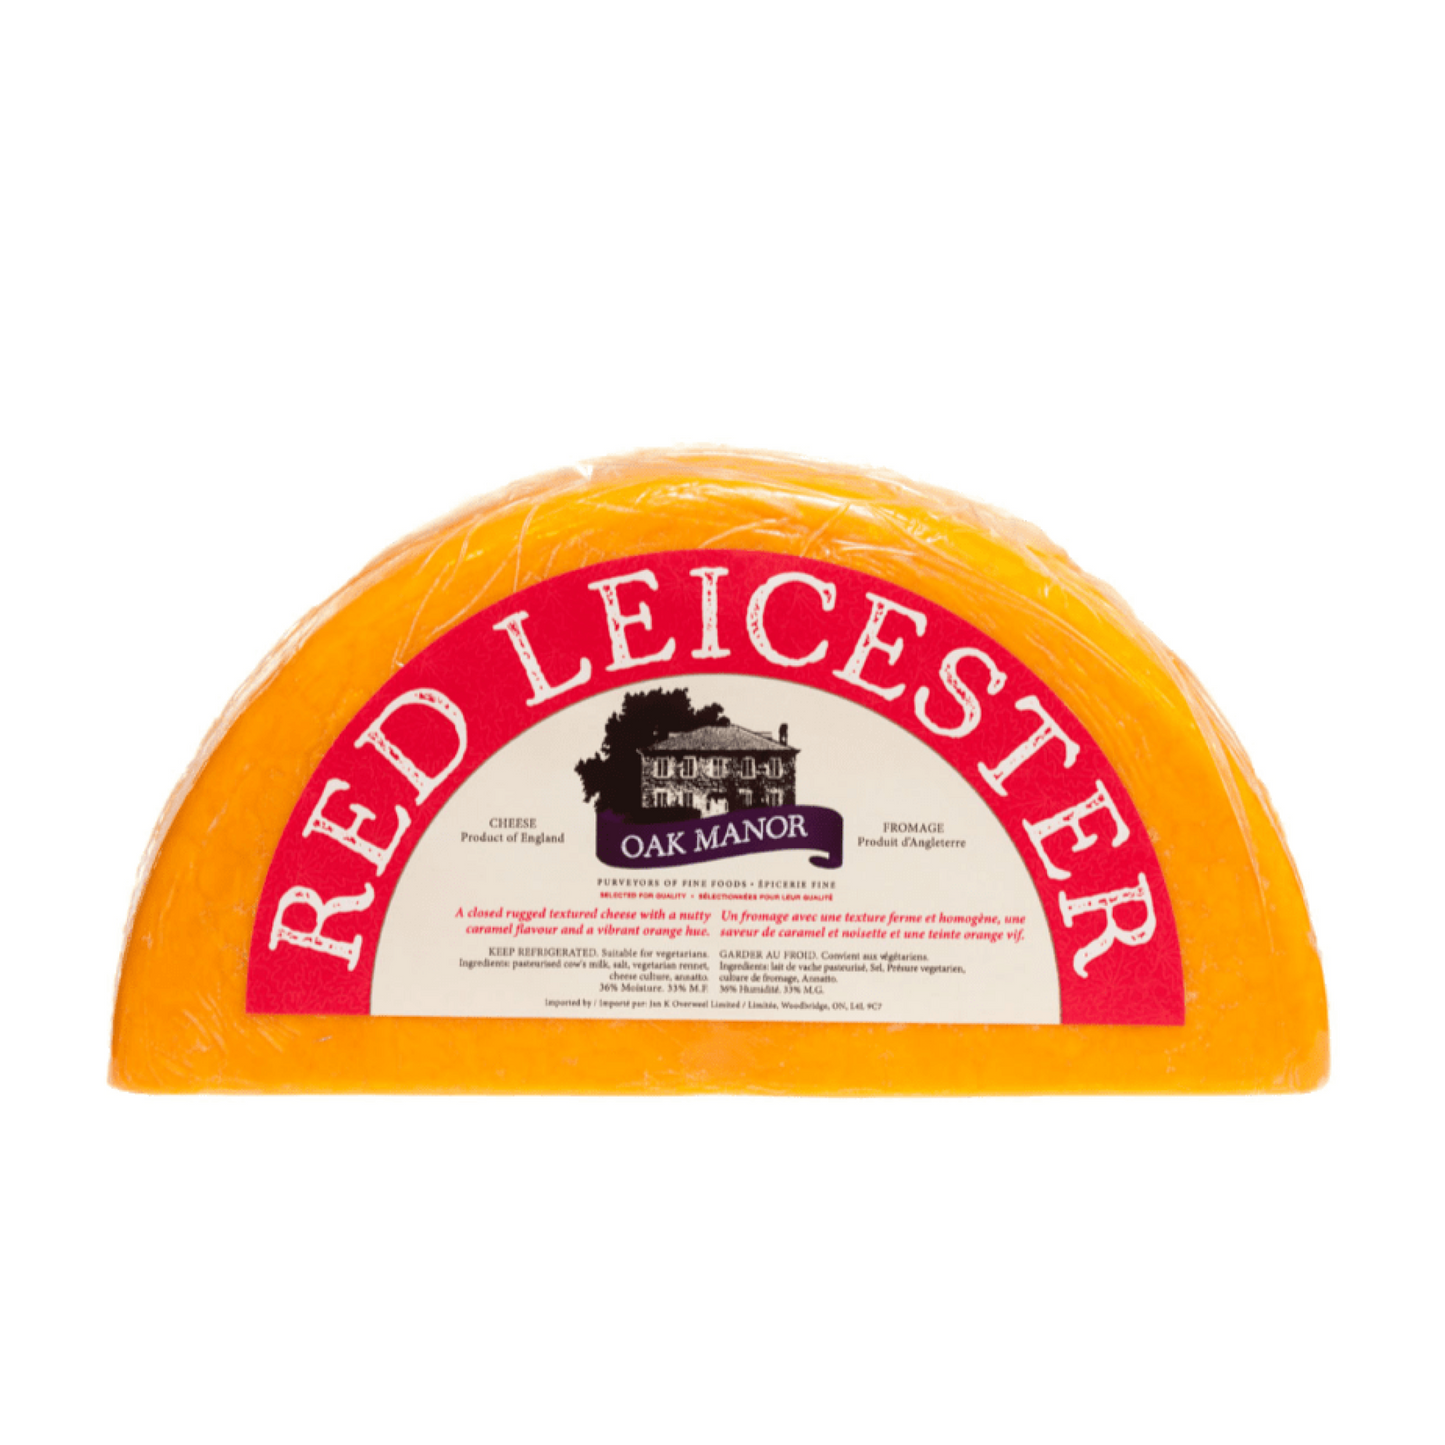 Oak Manor Red Leicester